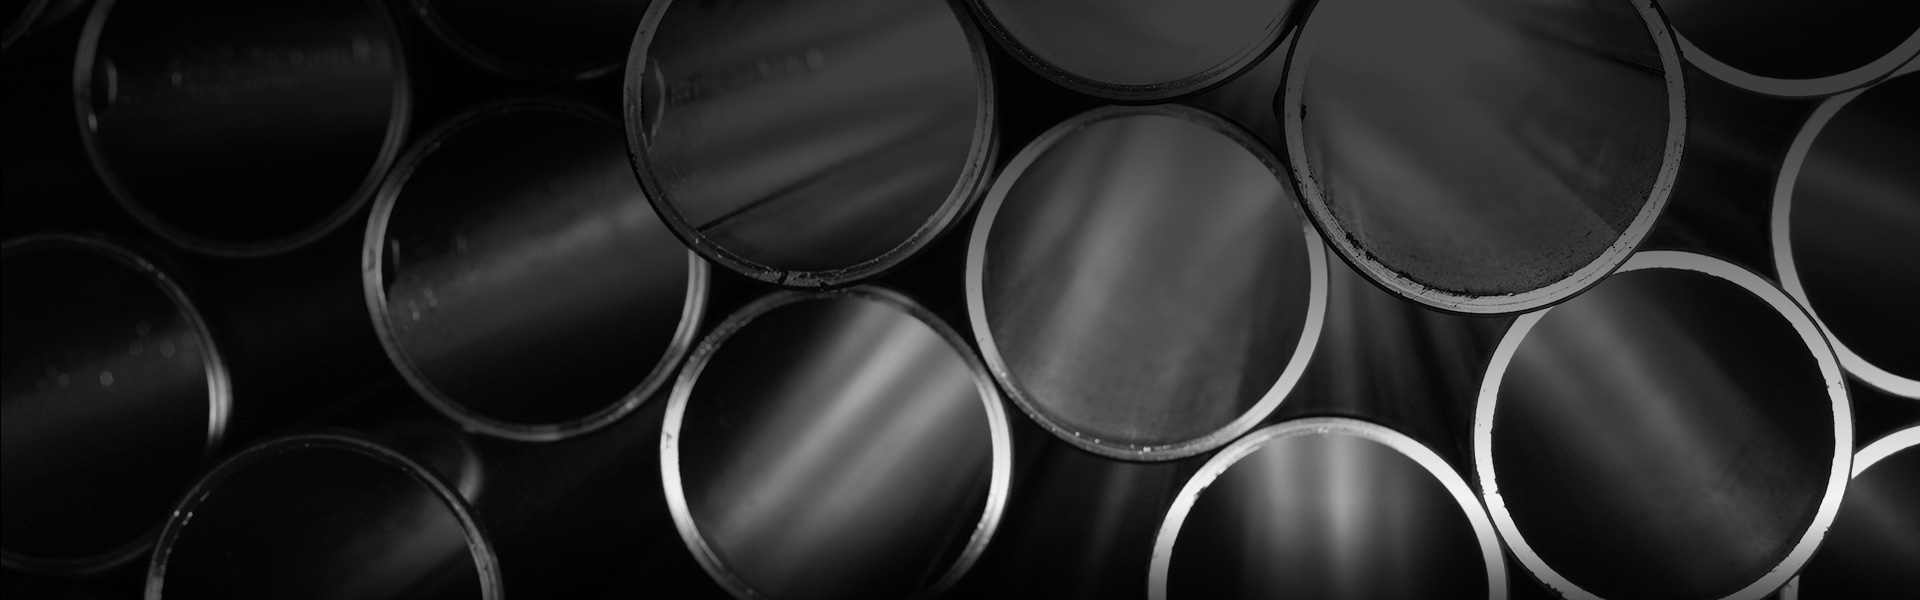 Image representing stainless steel pipes and fittings